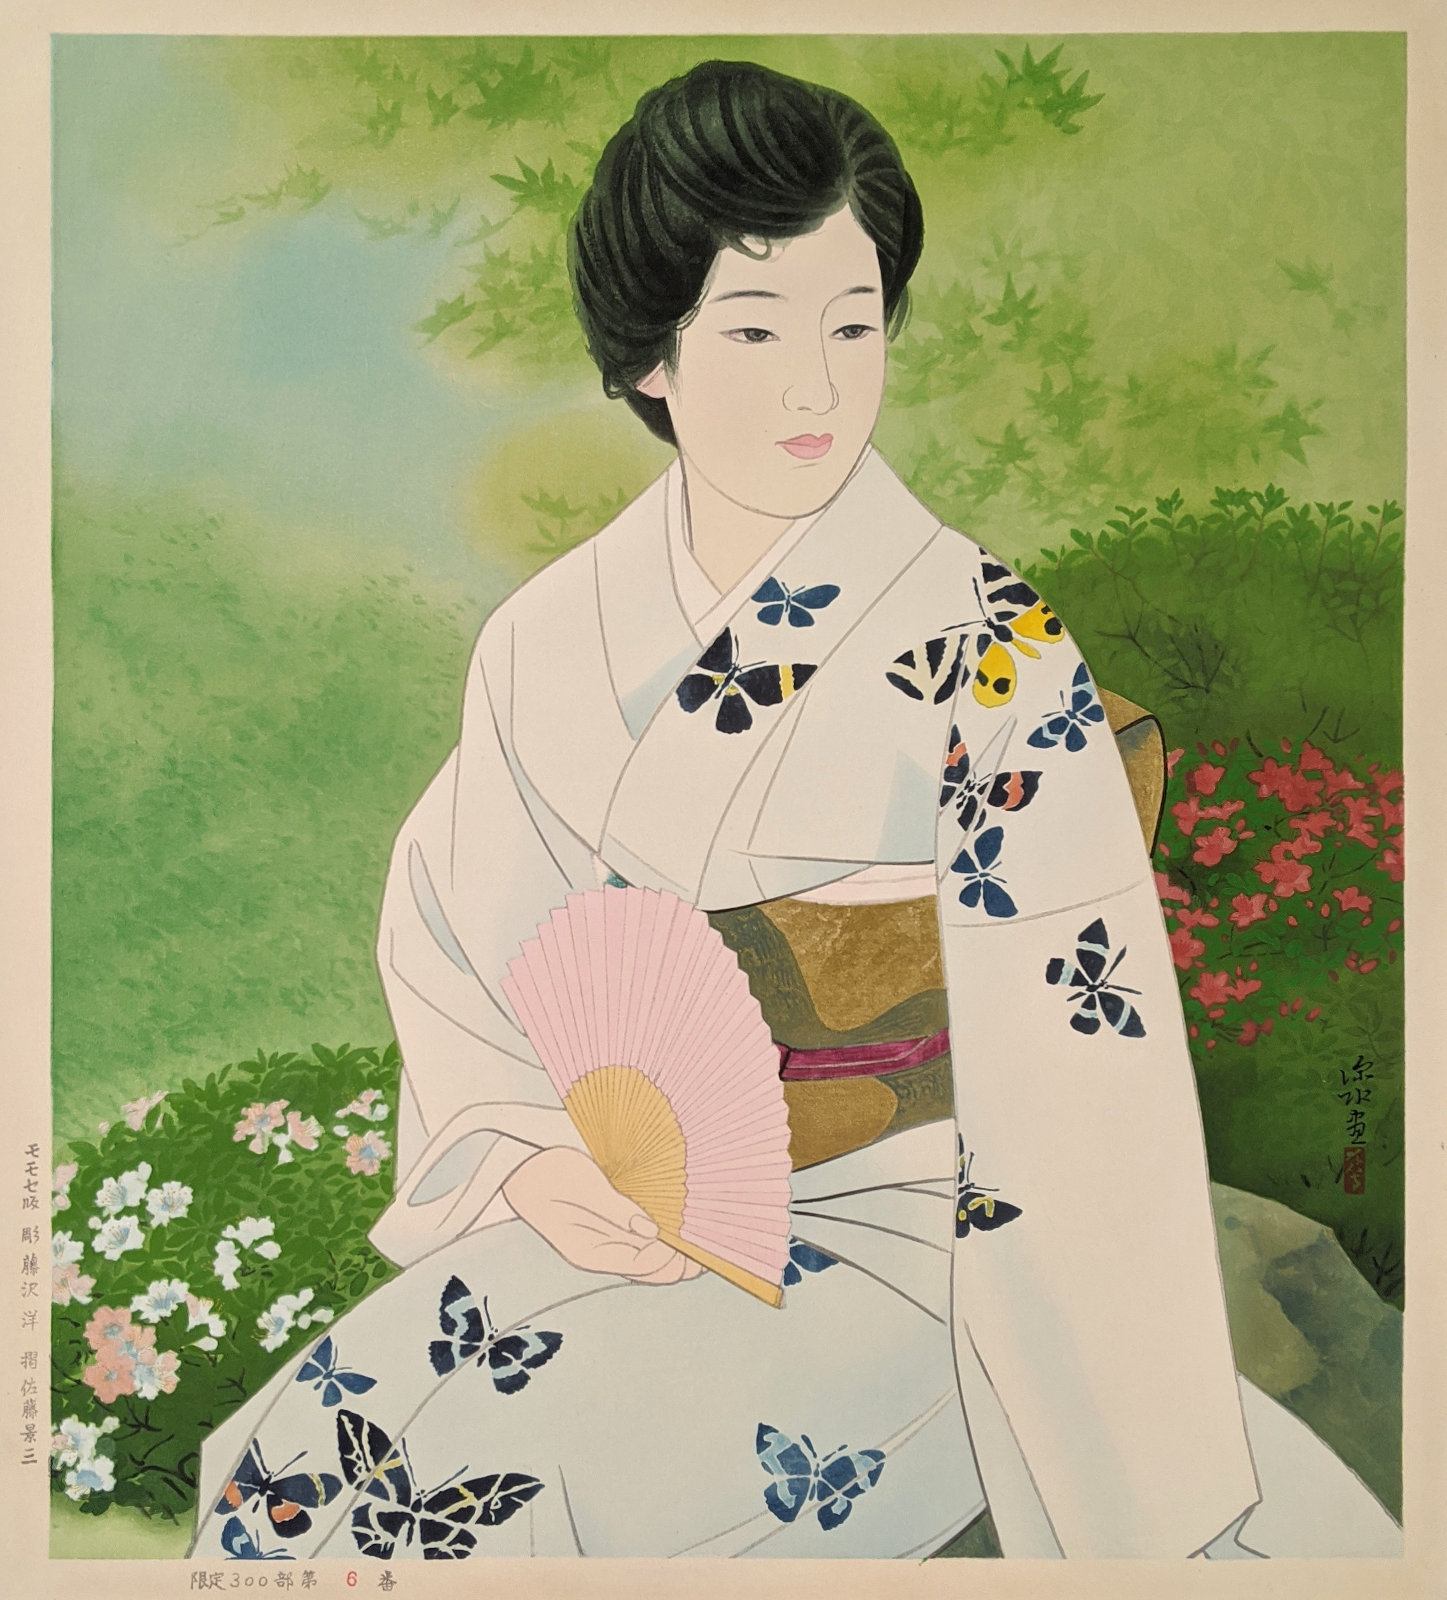 Shinsui Ito “Garden in Early Summer” 1985 woodblock print